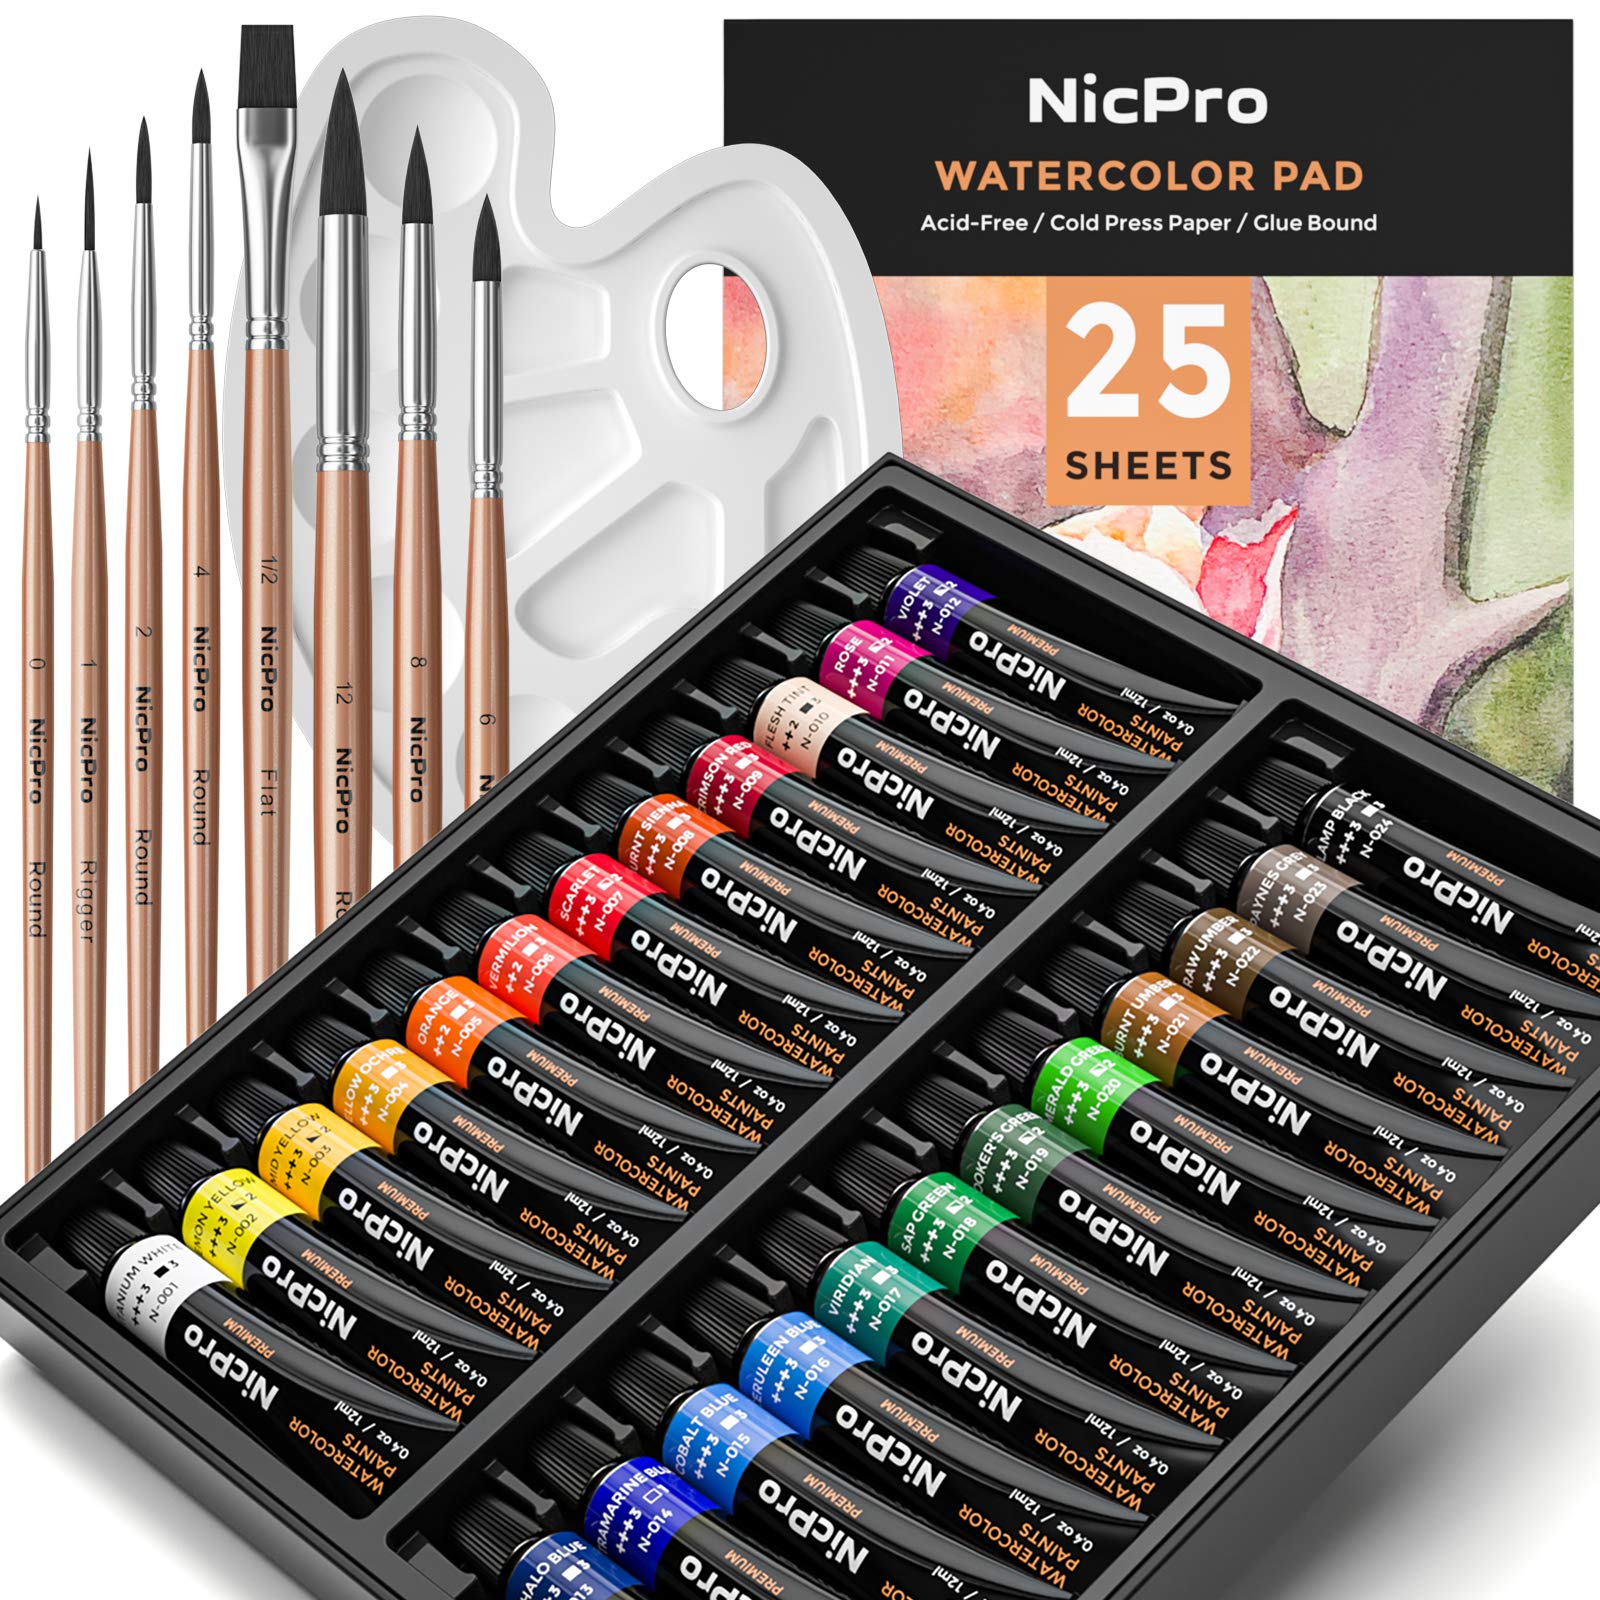 Oil Paint Set for Adults and Kids - Oil Painting Art Kits Supplies